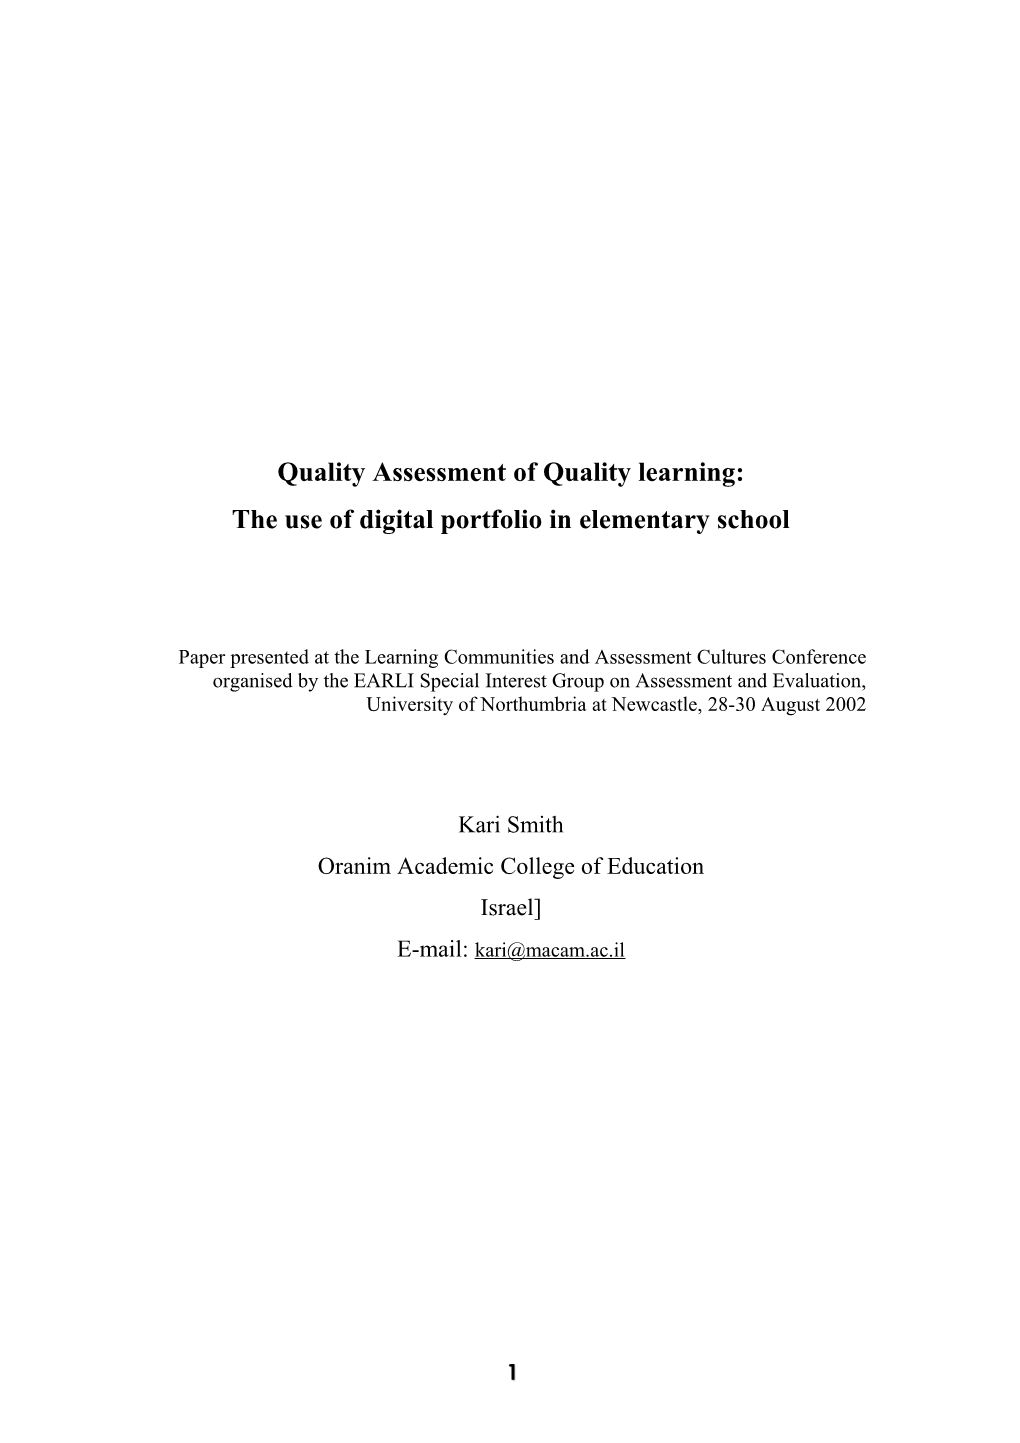 Quality Assessment of Quality Learning